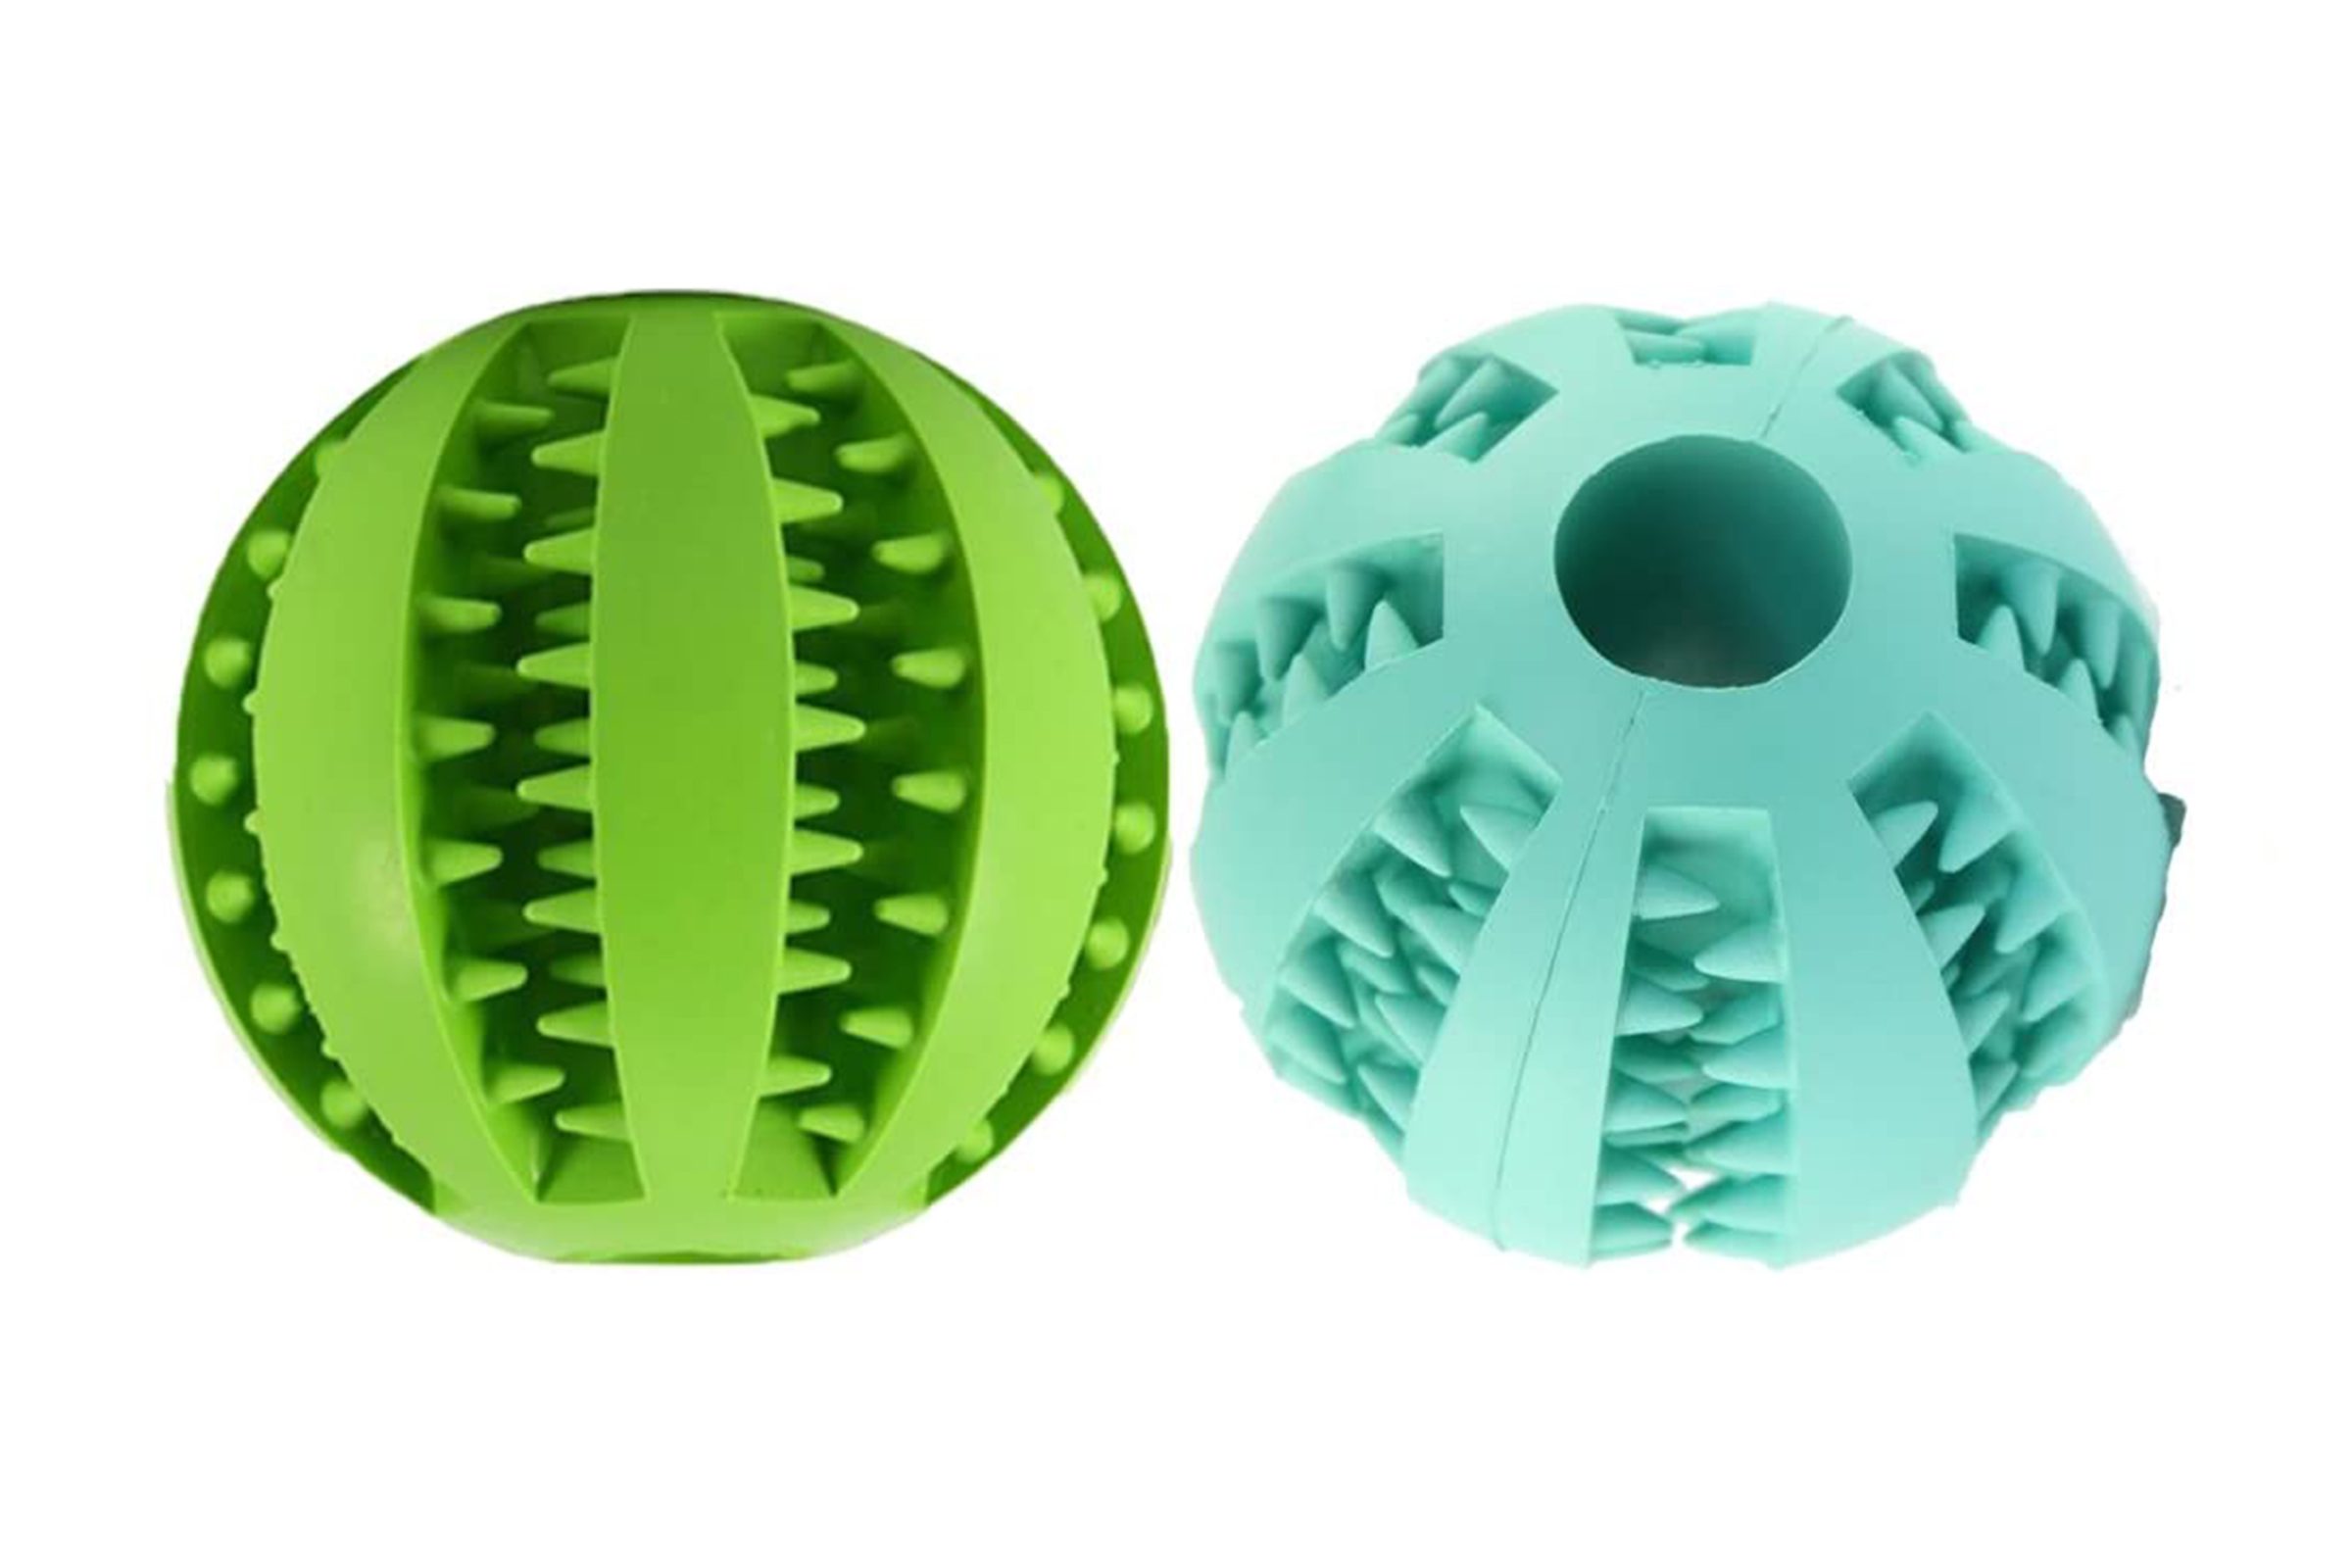 Tuwicx Interactive & Indestructible Dog Toys for Boredom and